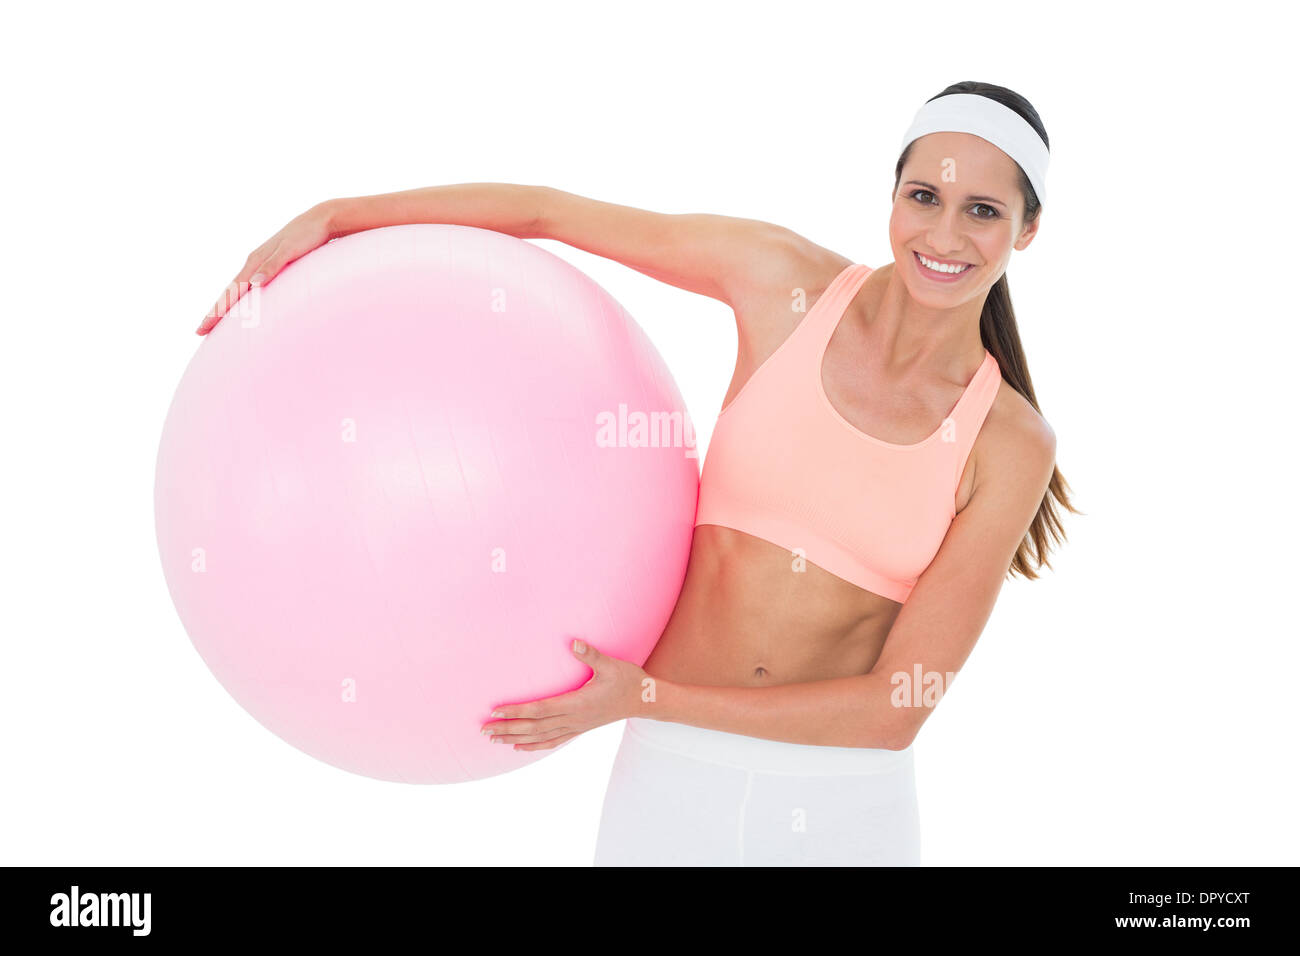 Portrait of a smiling fit woman holding fitness ball Stock Photo